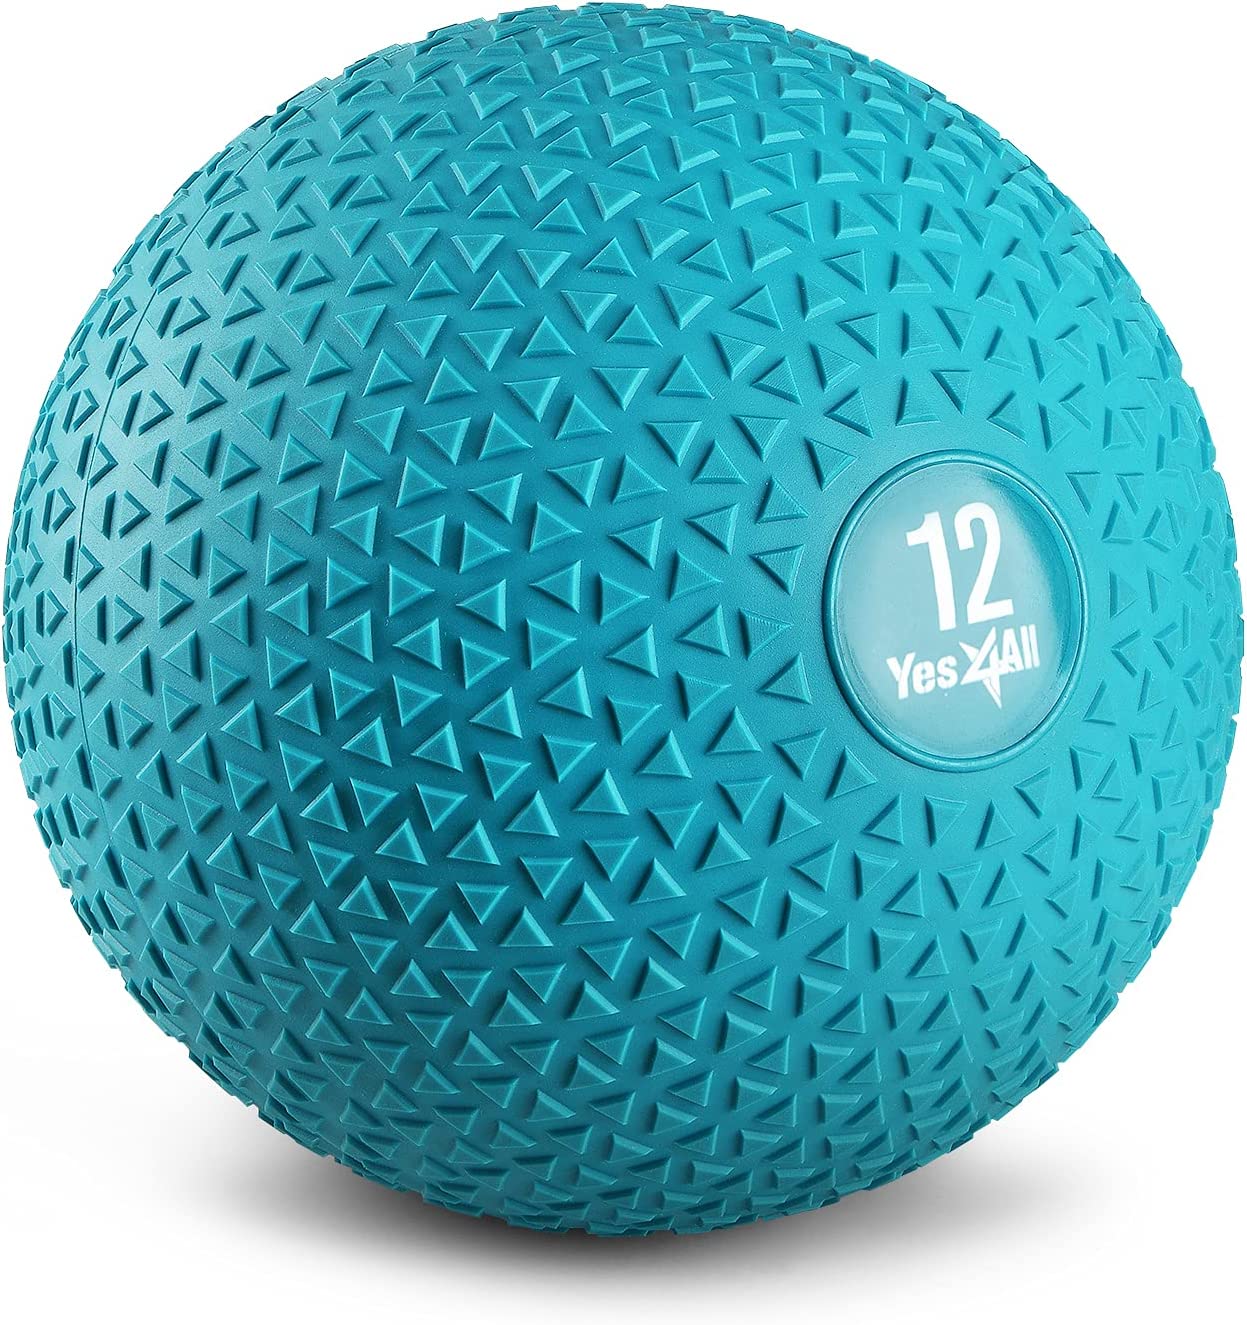 Yes4All 12lbs Slam Medicine Ball Triangle Teal - image 1 of 8